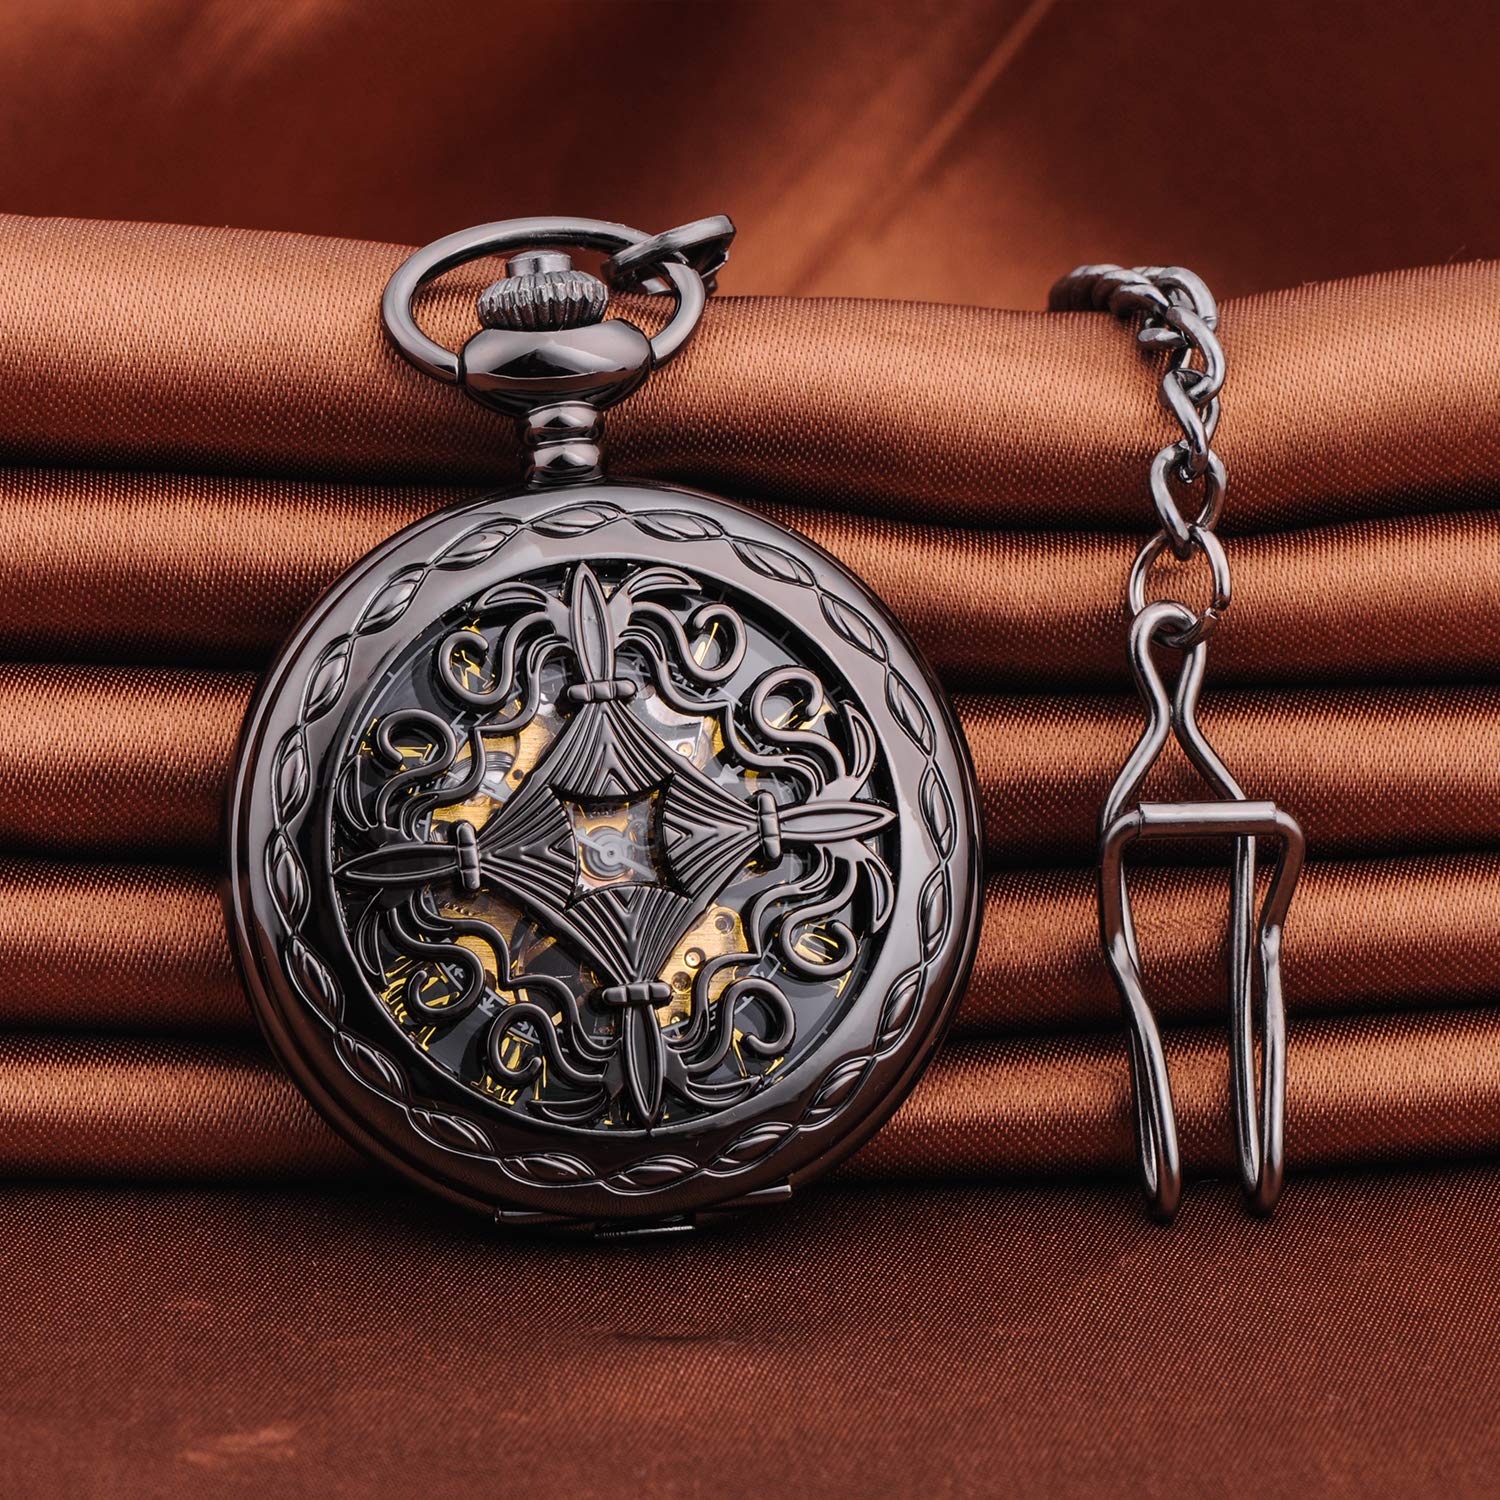 Classic Smooth Vintage Pocket Watch Black Copper Men Watch with Chain for Xmas Fathers Day Gift